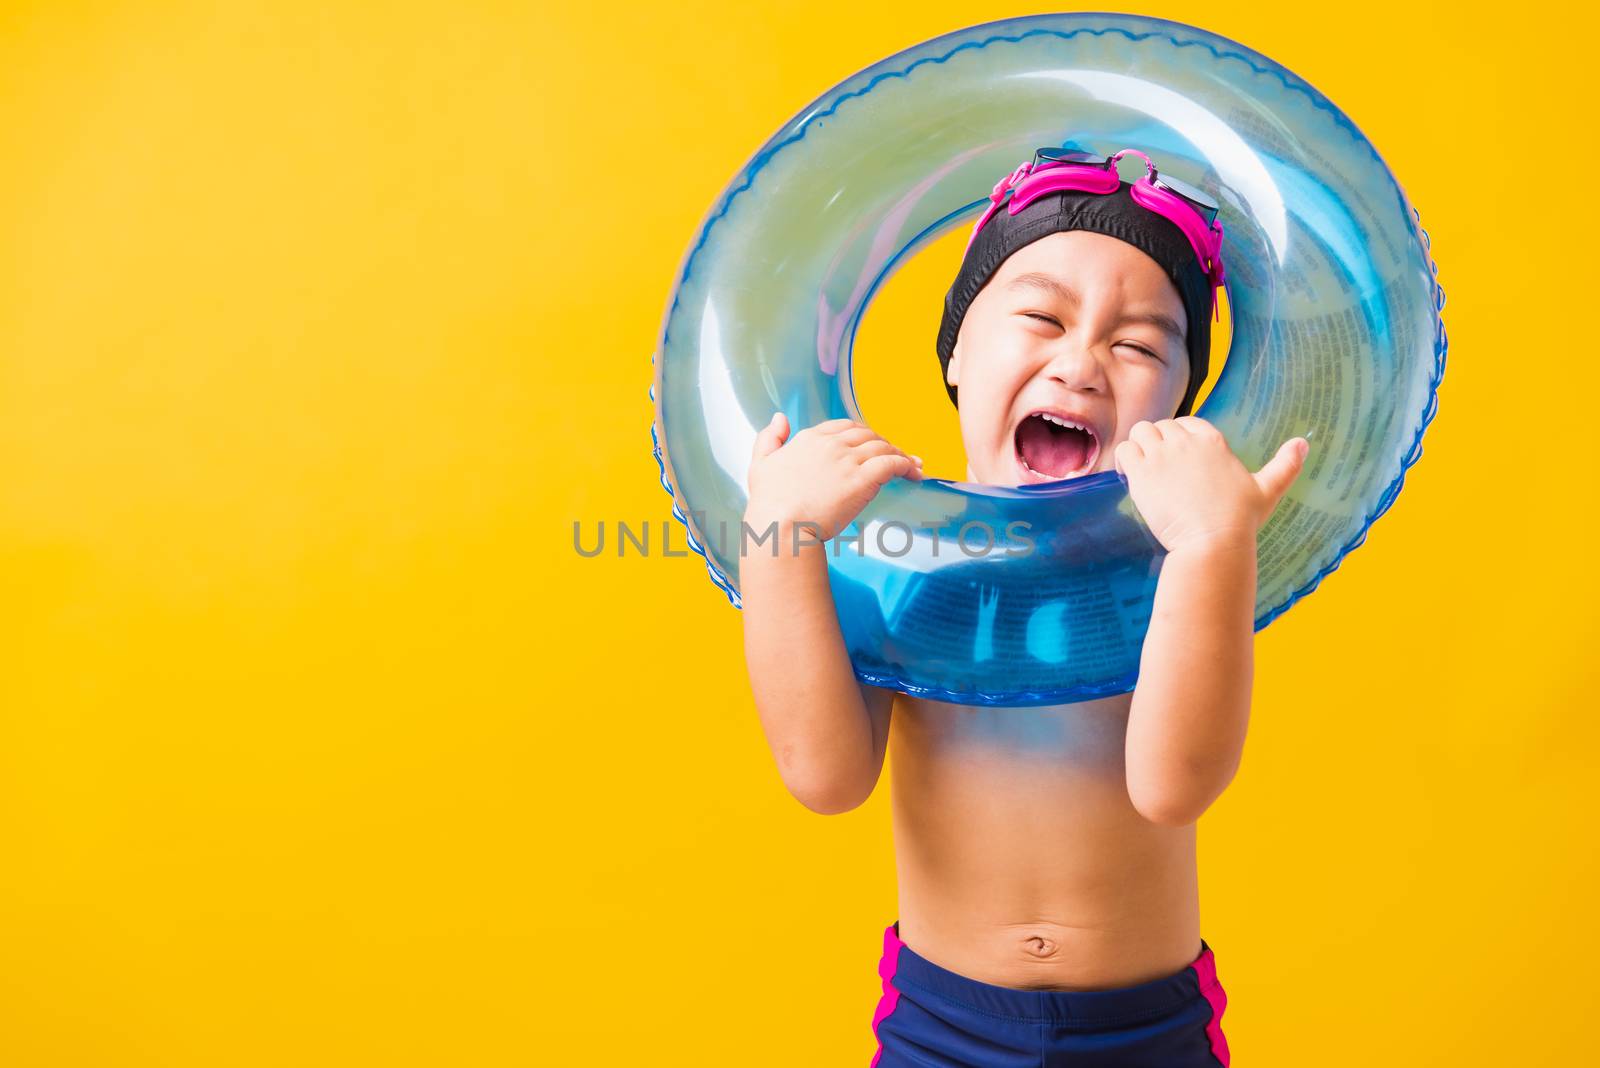 Summer vacation concept, Portrait Asian happy cute little child boy wear goggles and swimsuit hold blue inflatable ring, Kid having fun on summer vacation, studio shot isolated yellow background